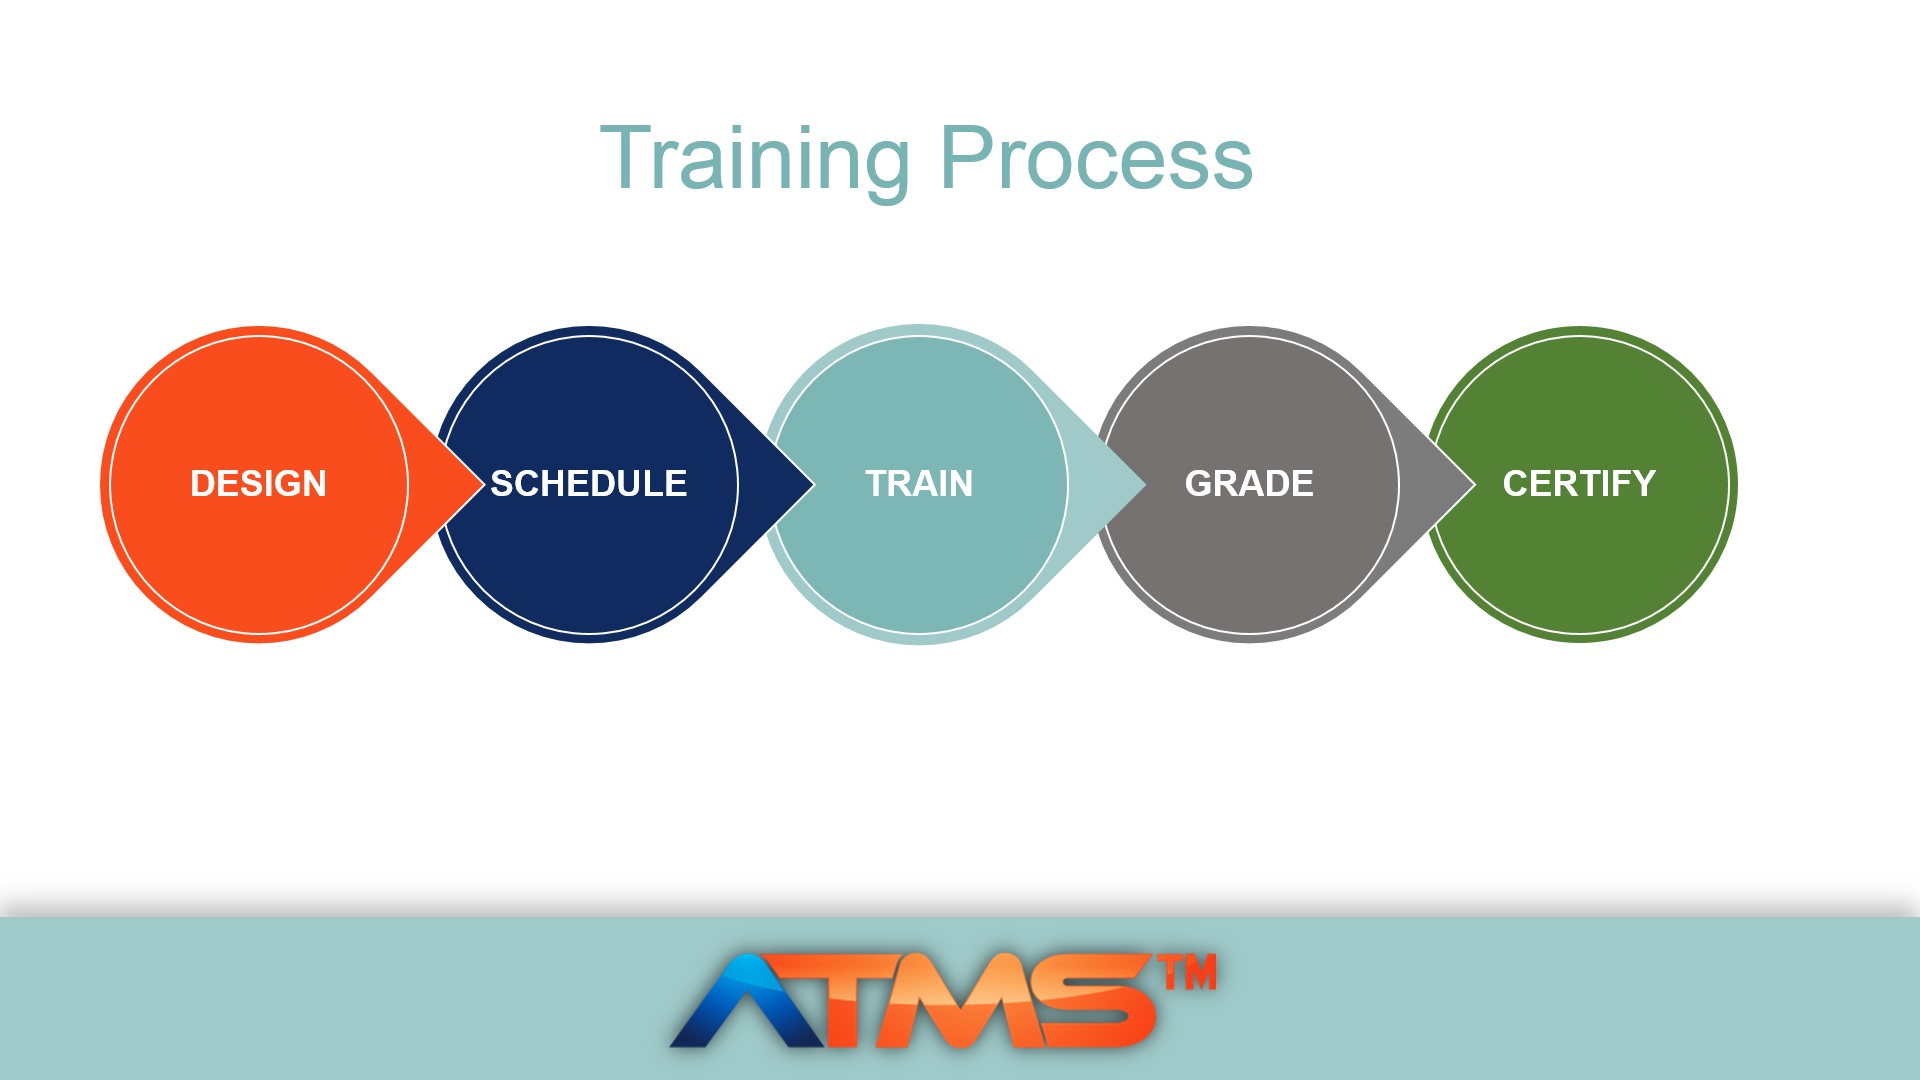 What is the Training Process?